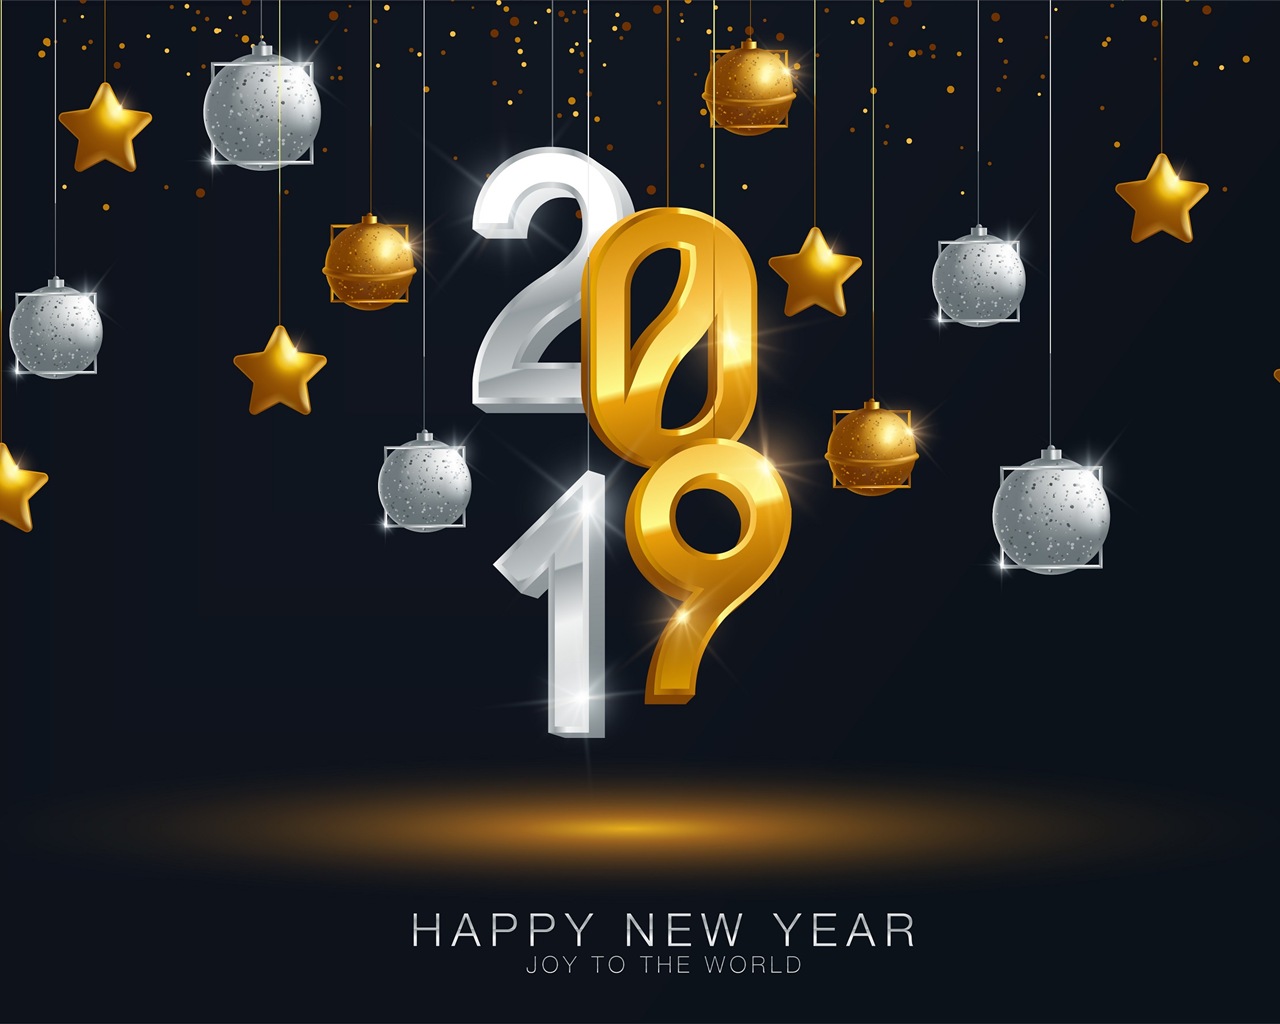 Happy New Year 2019 HD wallpapers #12 - 1280x1024